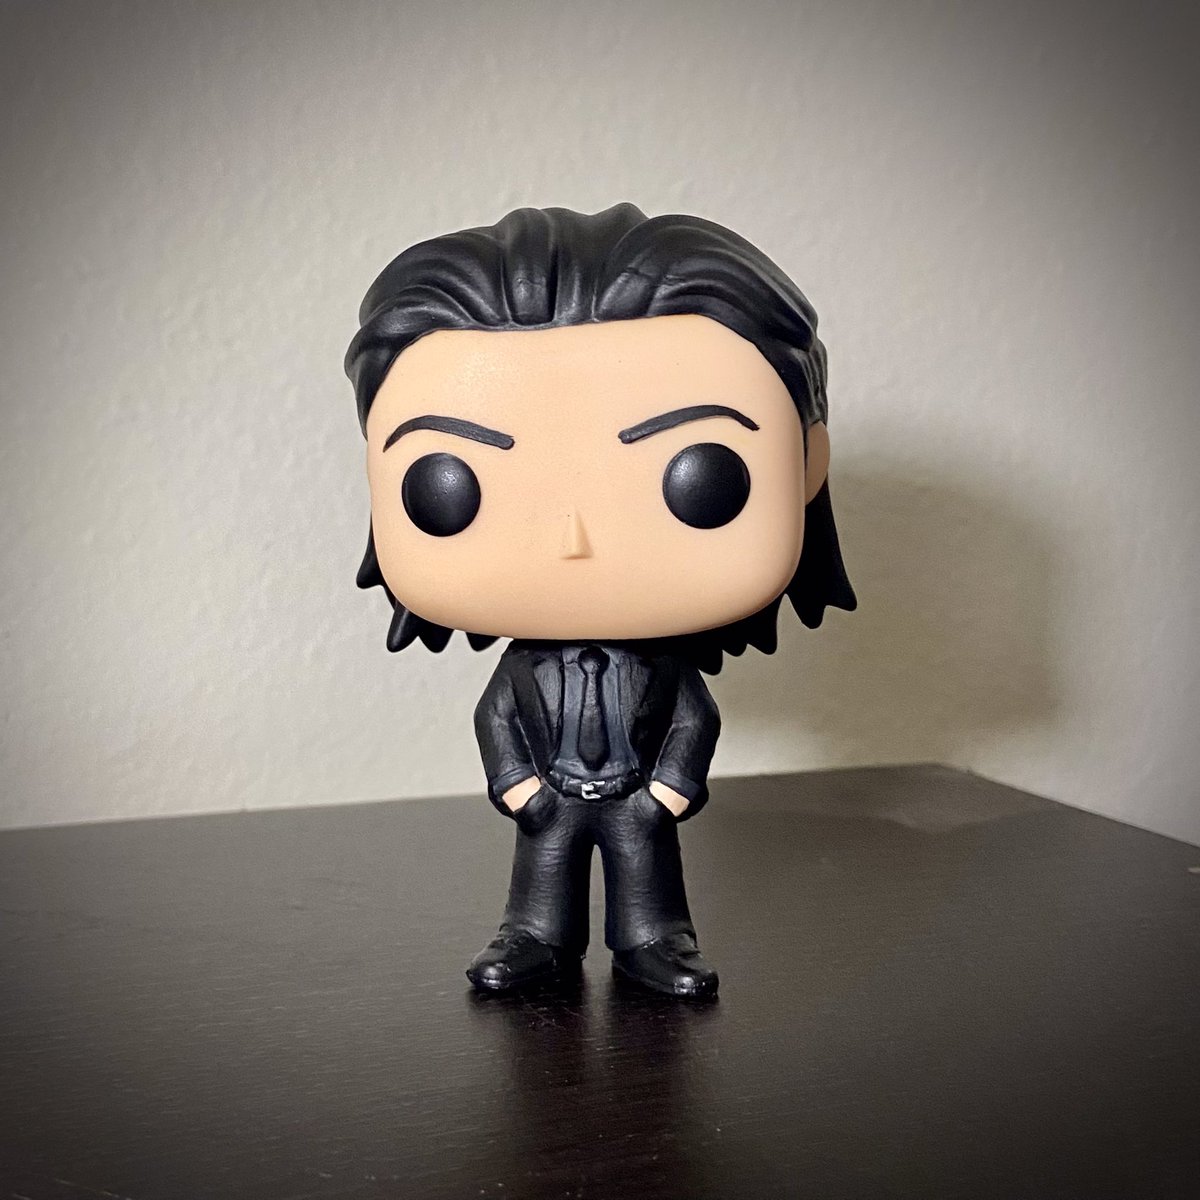 I came across another head that I used for the Ragnarok Loki with daggers. I didn’t have parts to make another one of those, so I decided to do one just in his black suit.   #funko #popvinyl #funkocustoms #popcustoms #spasticcustoms #customfunko #custompop #loki #thorragnarok